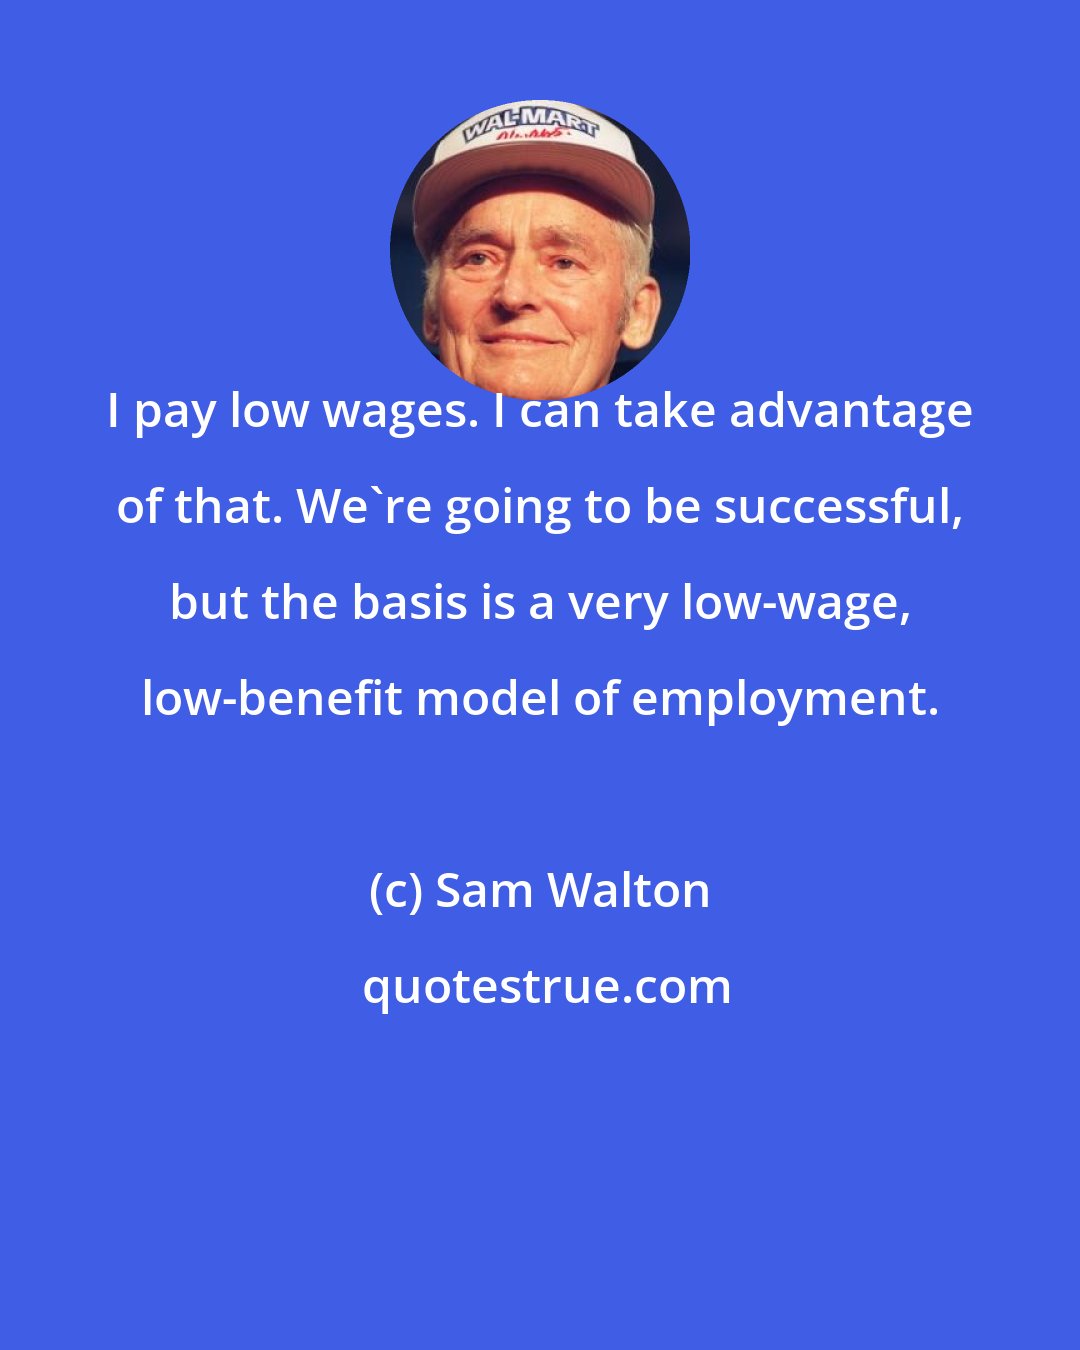 Sam Walton: I pay low wages. I can take advantage of that. We're going to be successful, but the basis is a very low-wage, low-benefit model of employment.